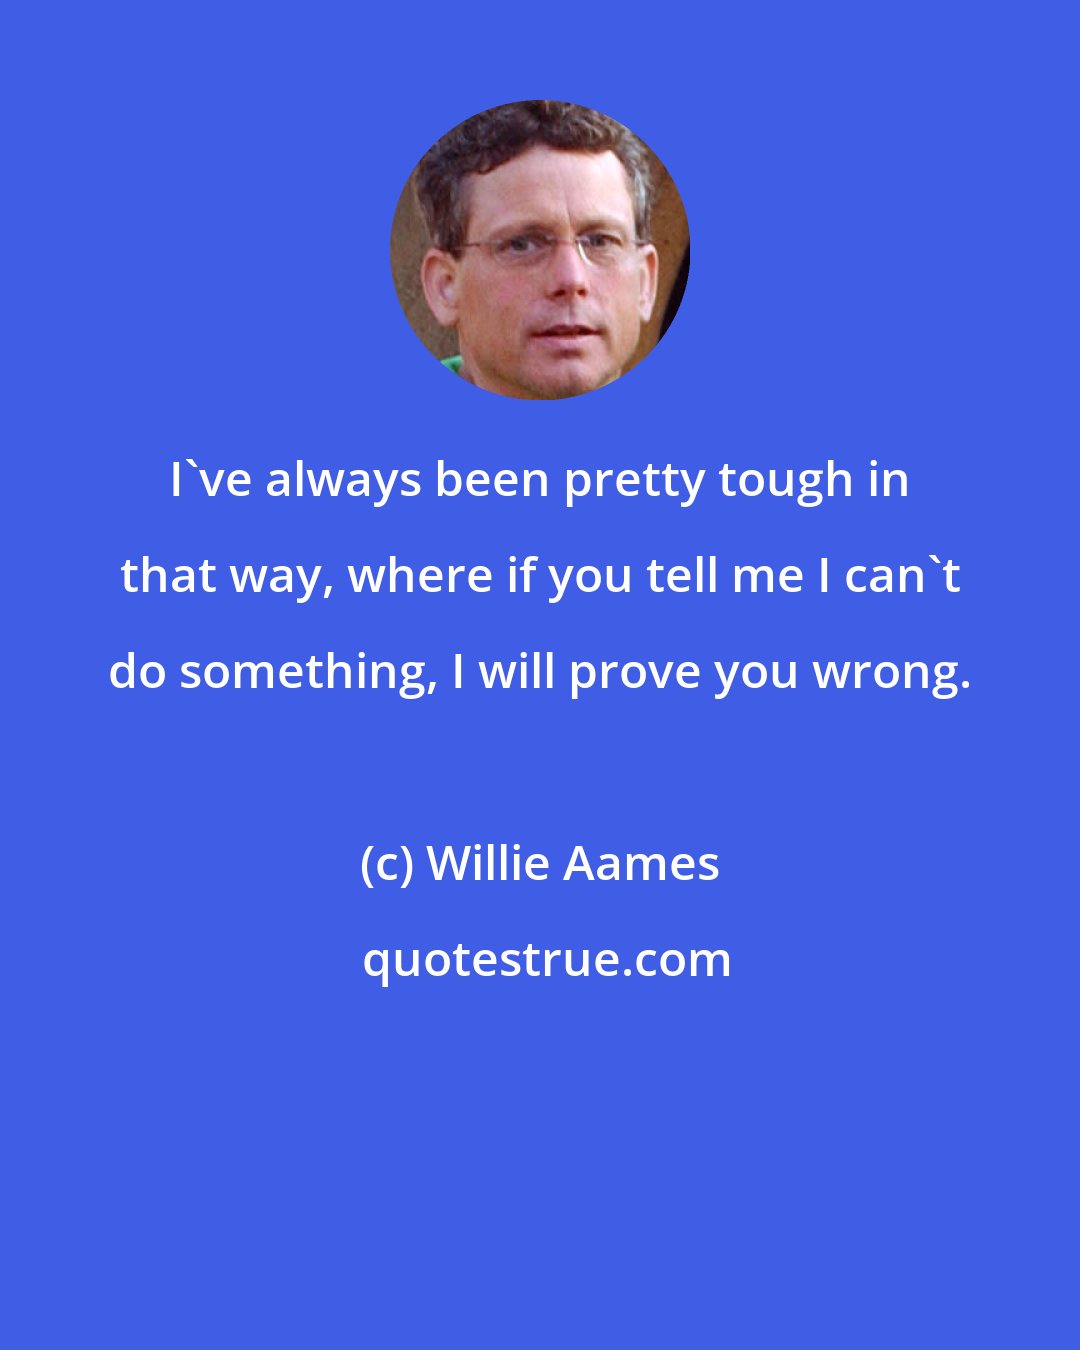 Willie Aames: I've always been pretty tough in that way, where if you tell me I can't do something, I will prove you wrong.